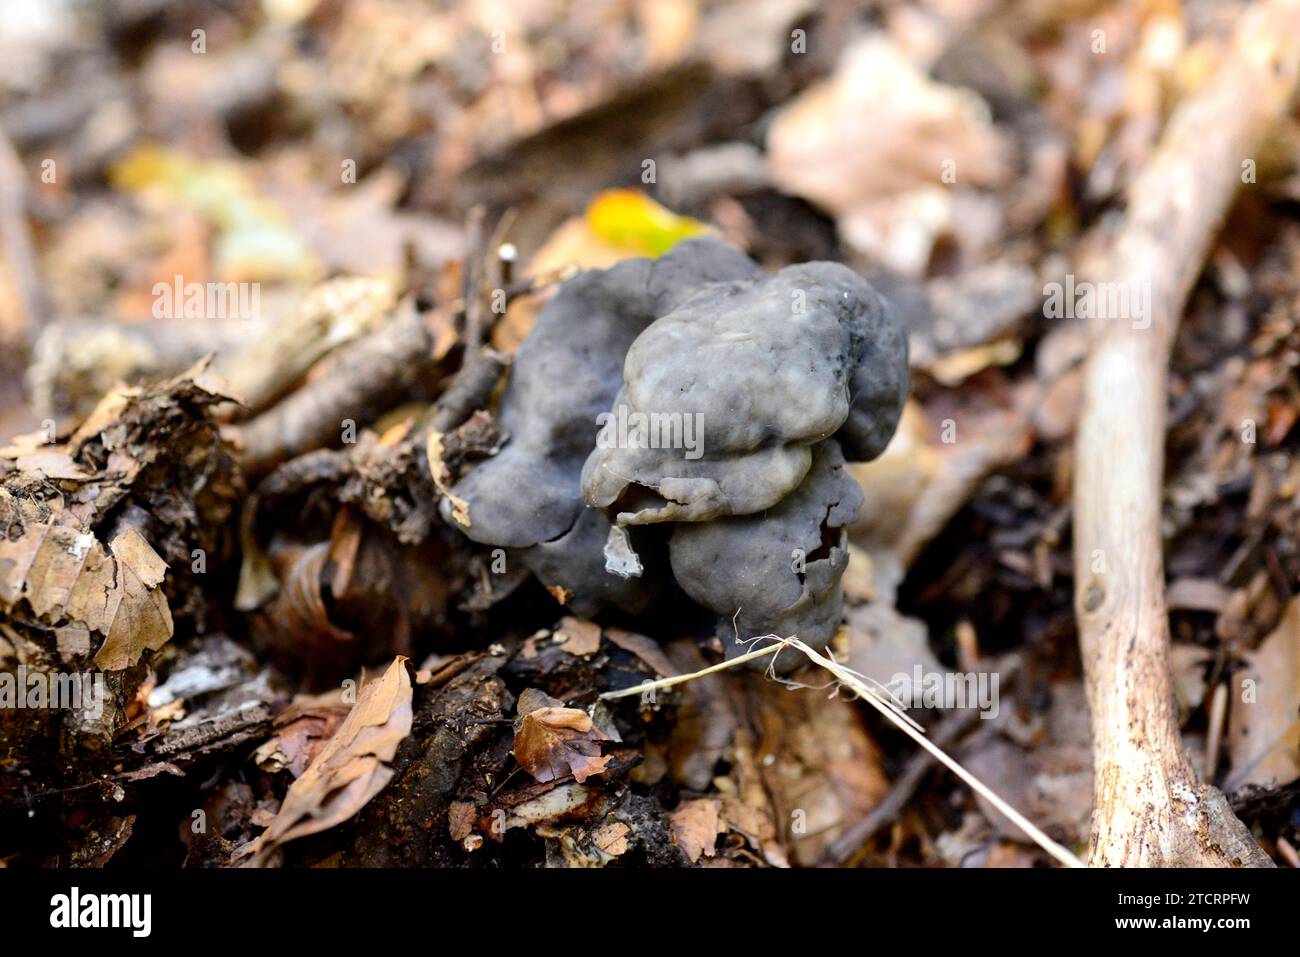 Elfin saddle or slate grey saddle (Helvella lacunosa) is an edible mushroom; it is consumed well-done but is not recommended. This photo was taken in Stock Photo